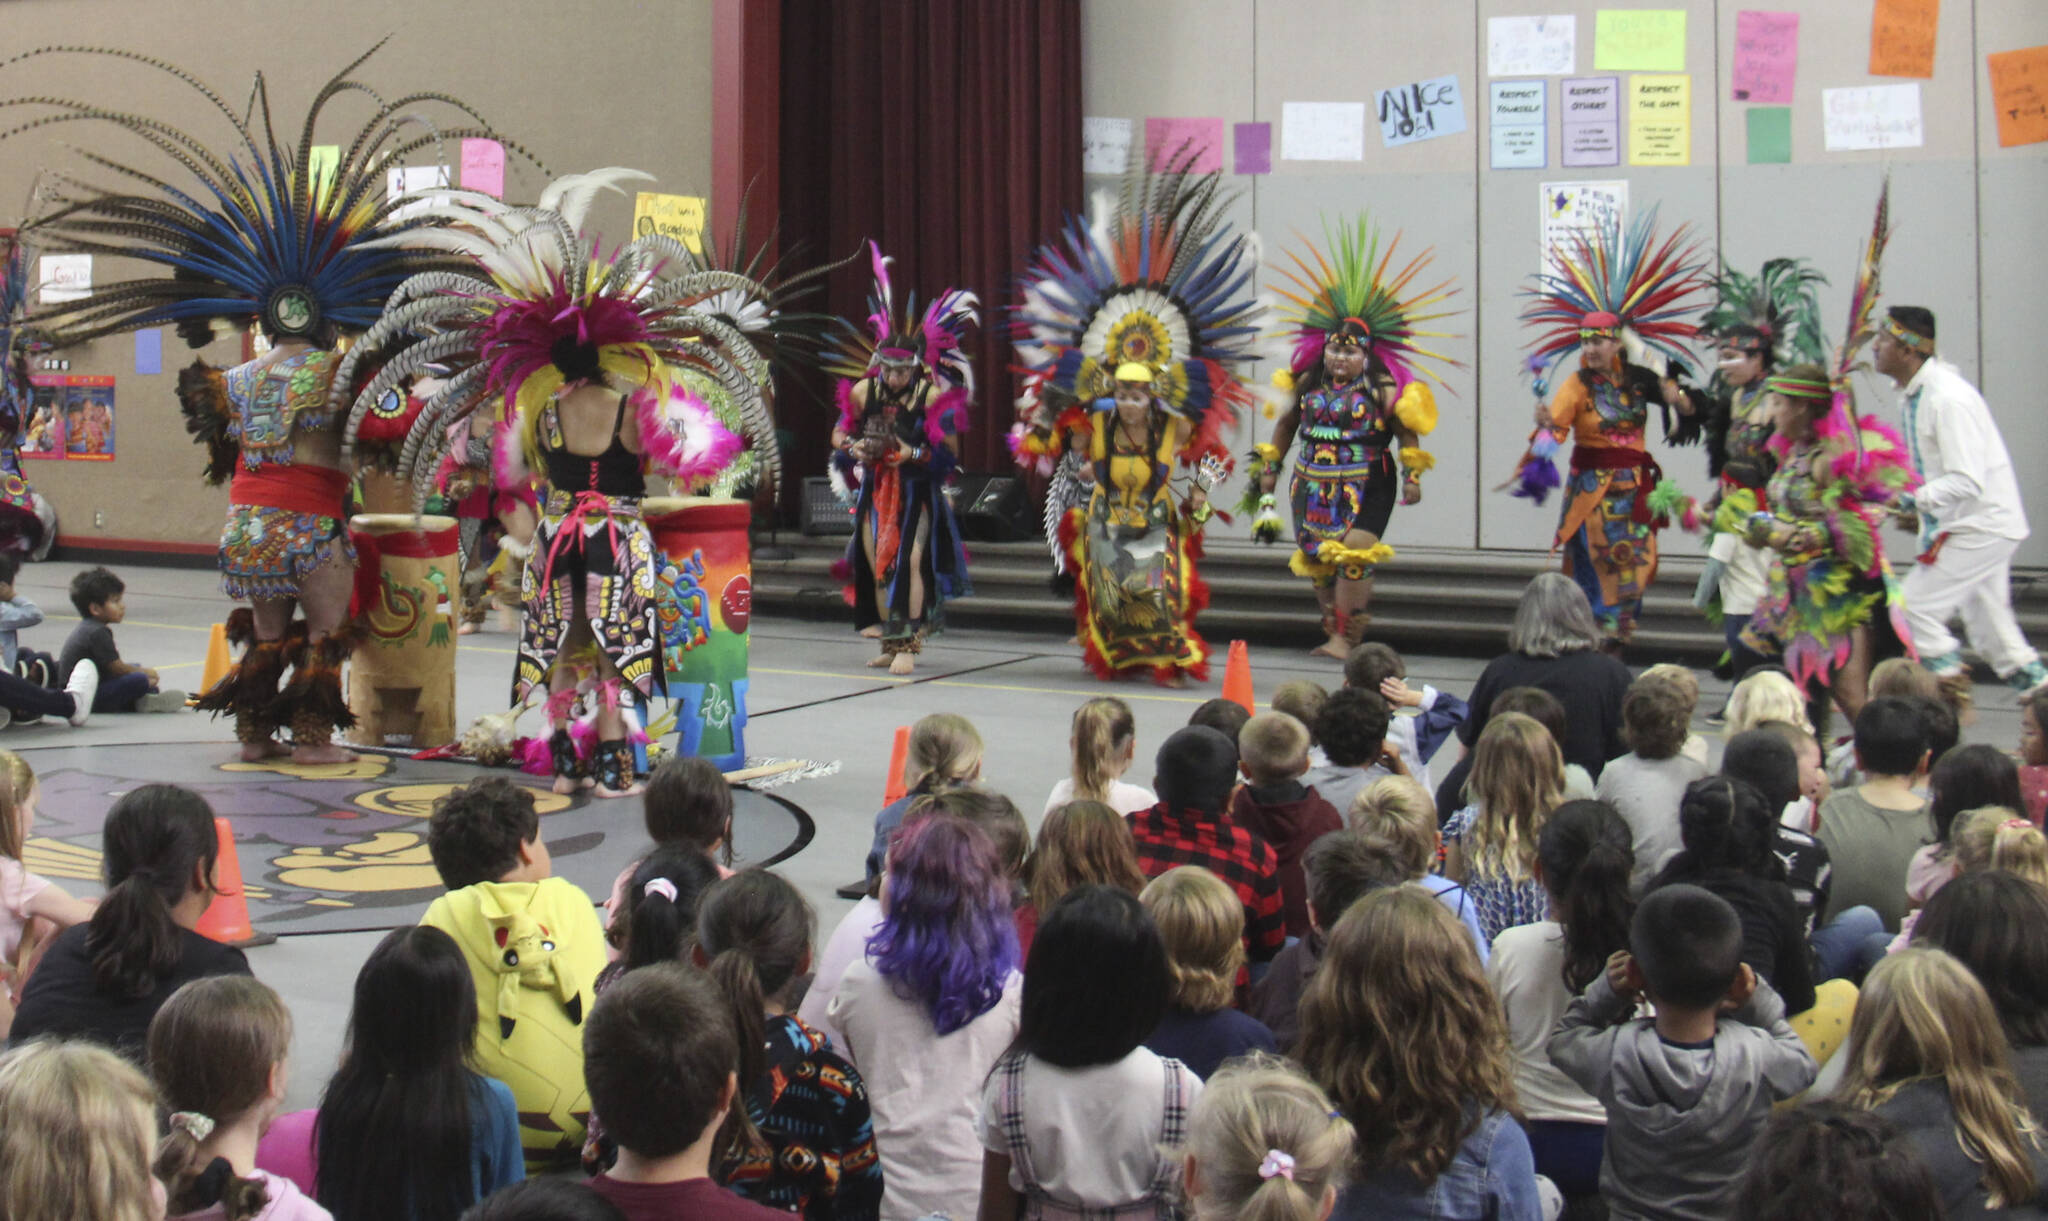 An Indigenous People’s Day Assembly was held Monday, October 10 at the Forks Elementary School Gym. Students enjoyed some thunderous group drumming, dancing, and singing by Ce Atl Tonalli a traditional Aztec Dance group.